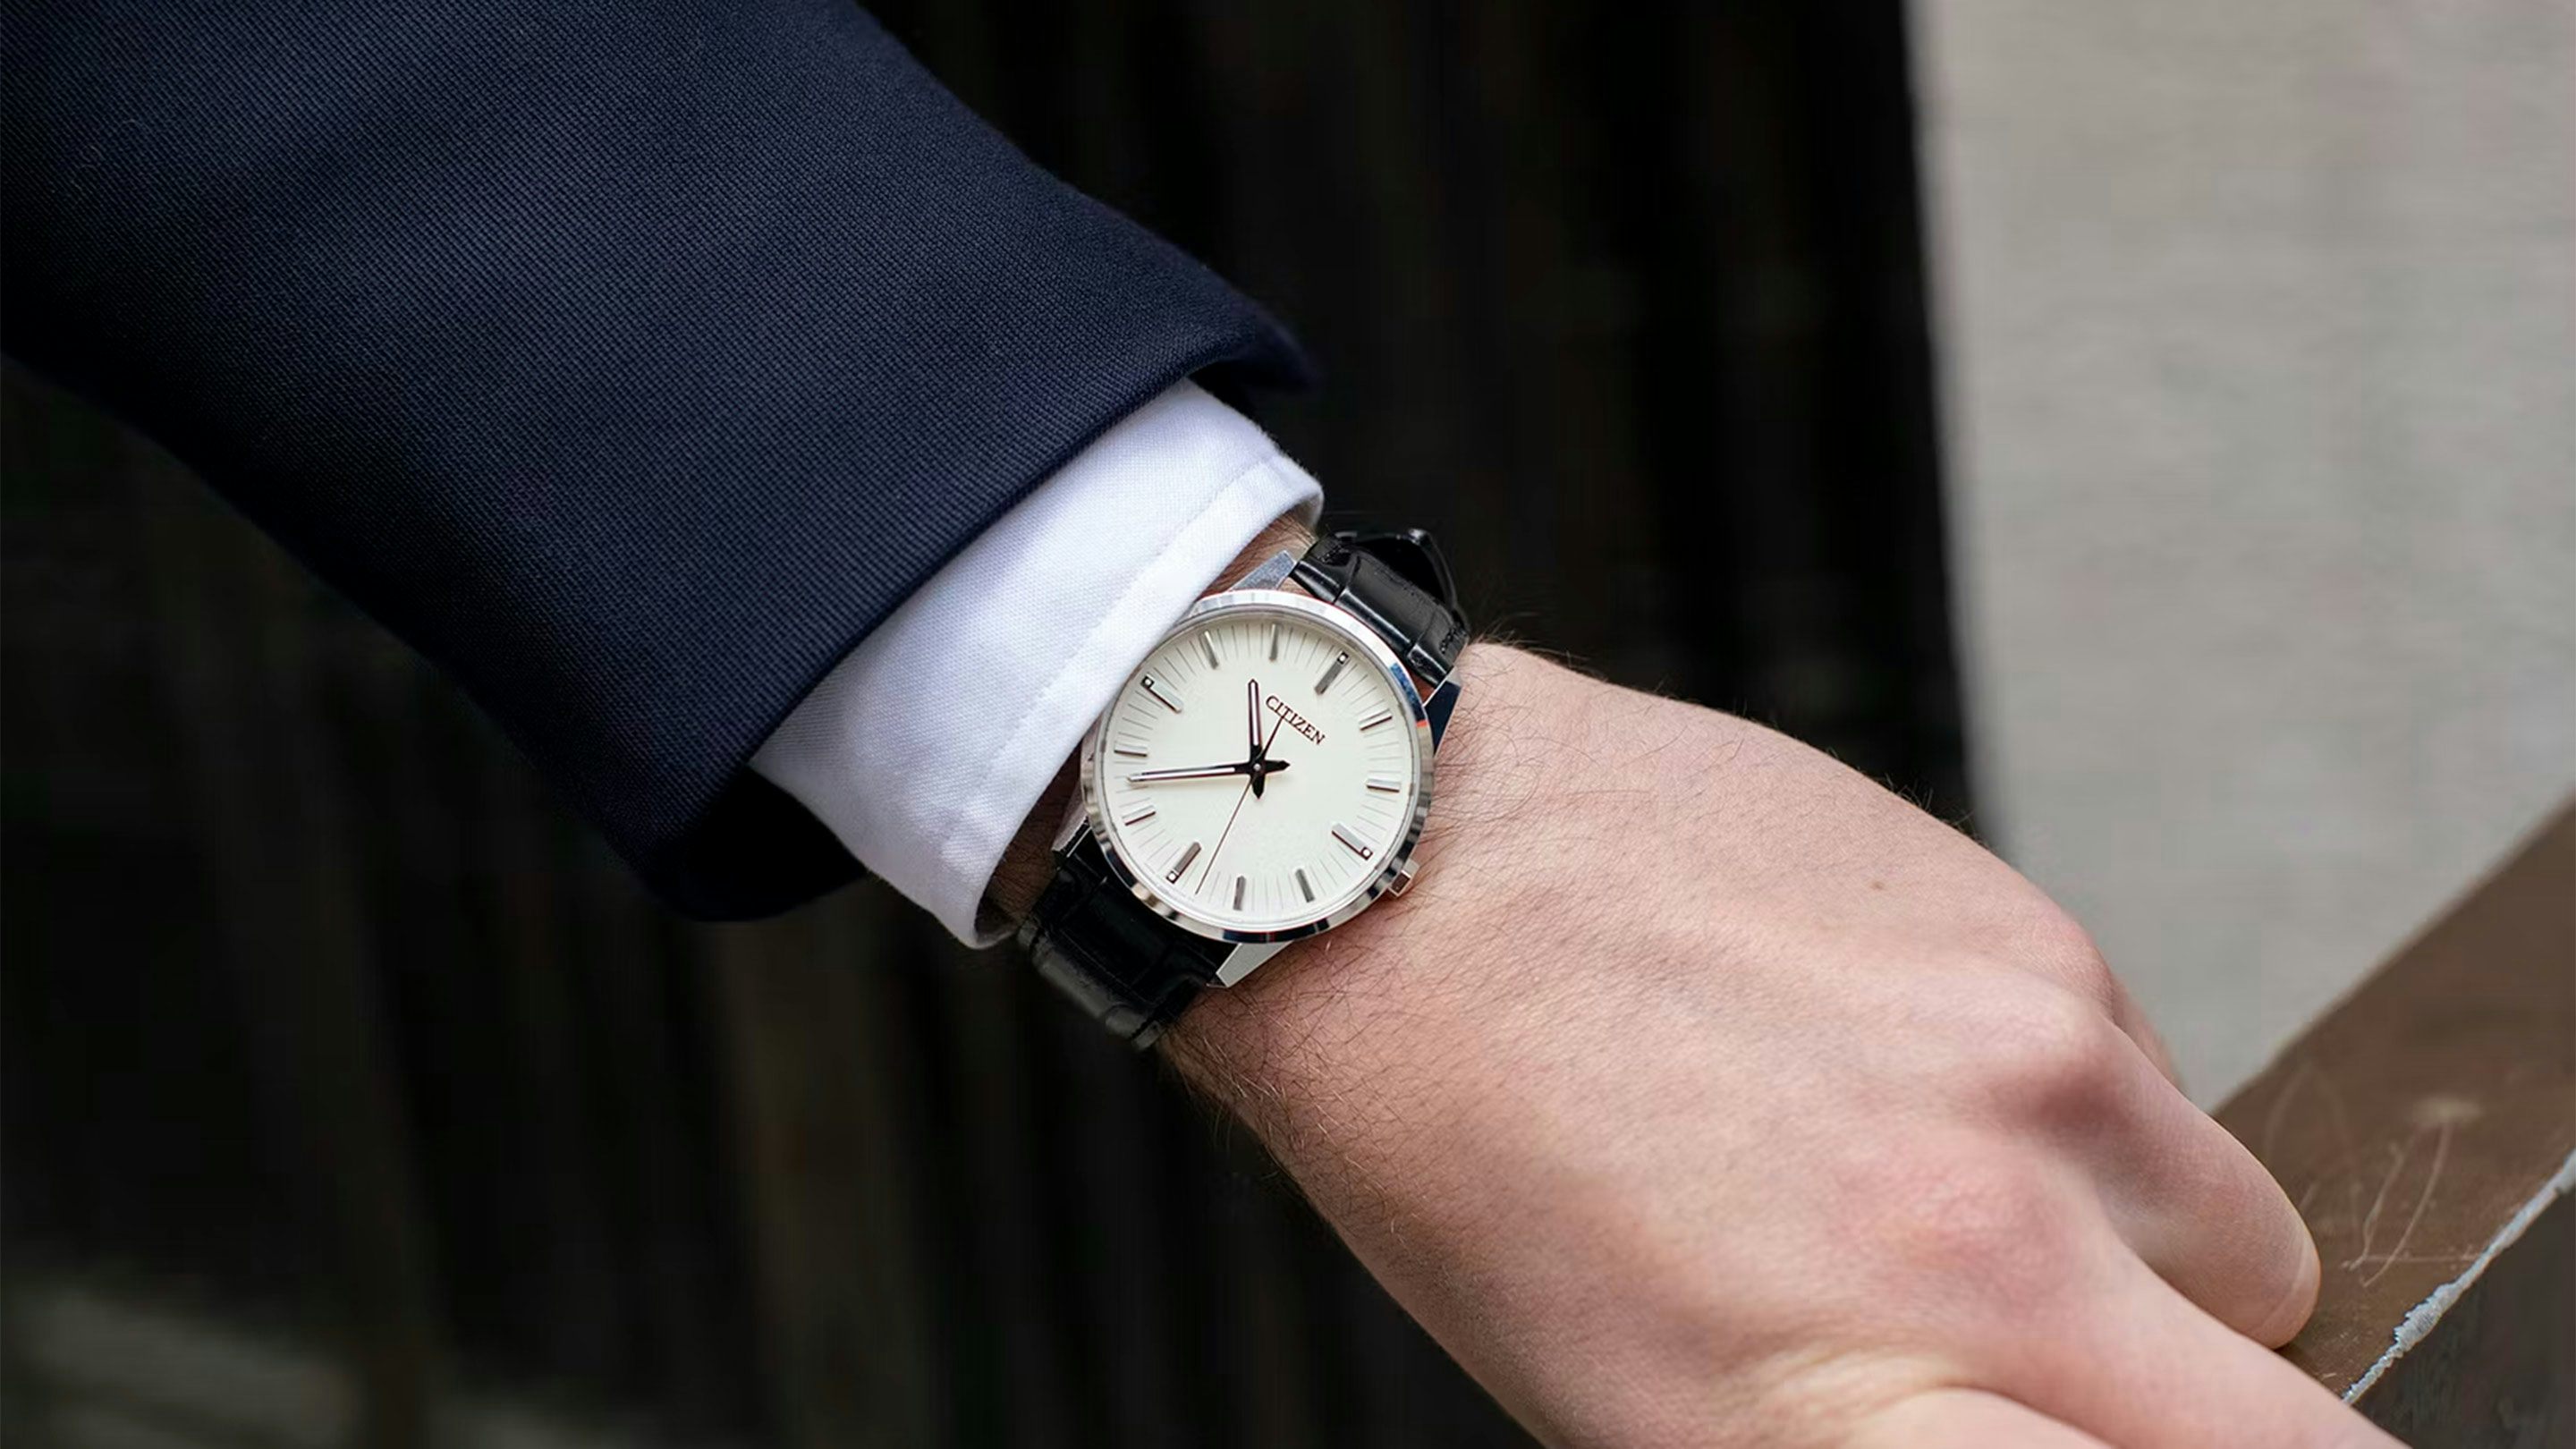 Watch With Deadbeat Seconds Function: Precision Timekeeping at Its Finest.